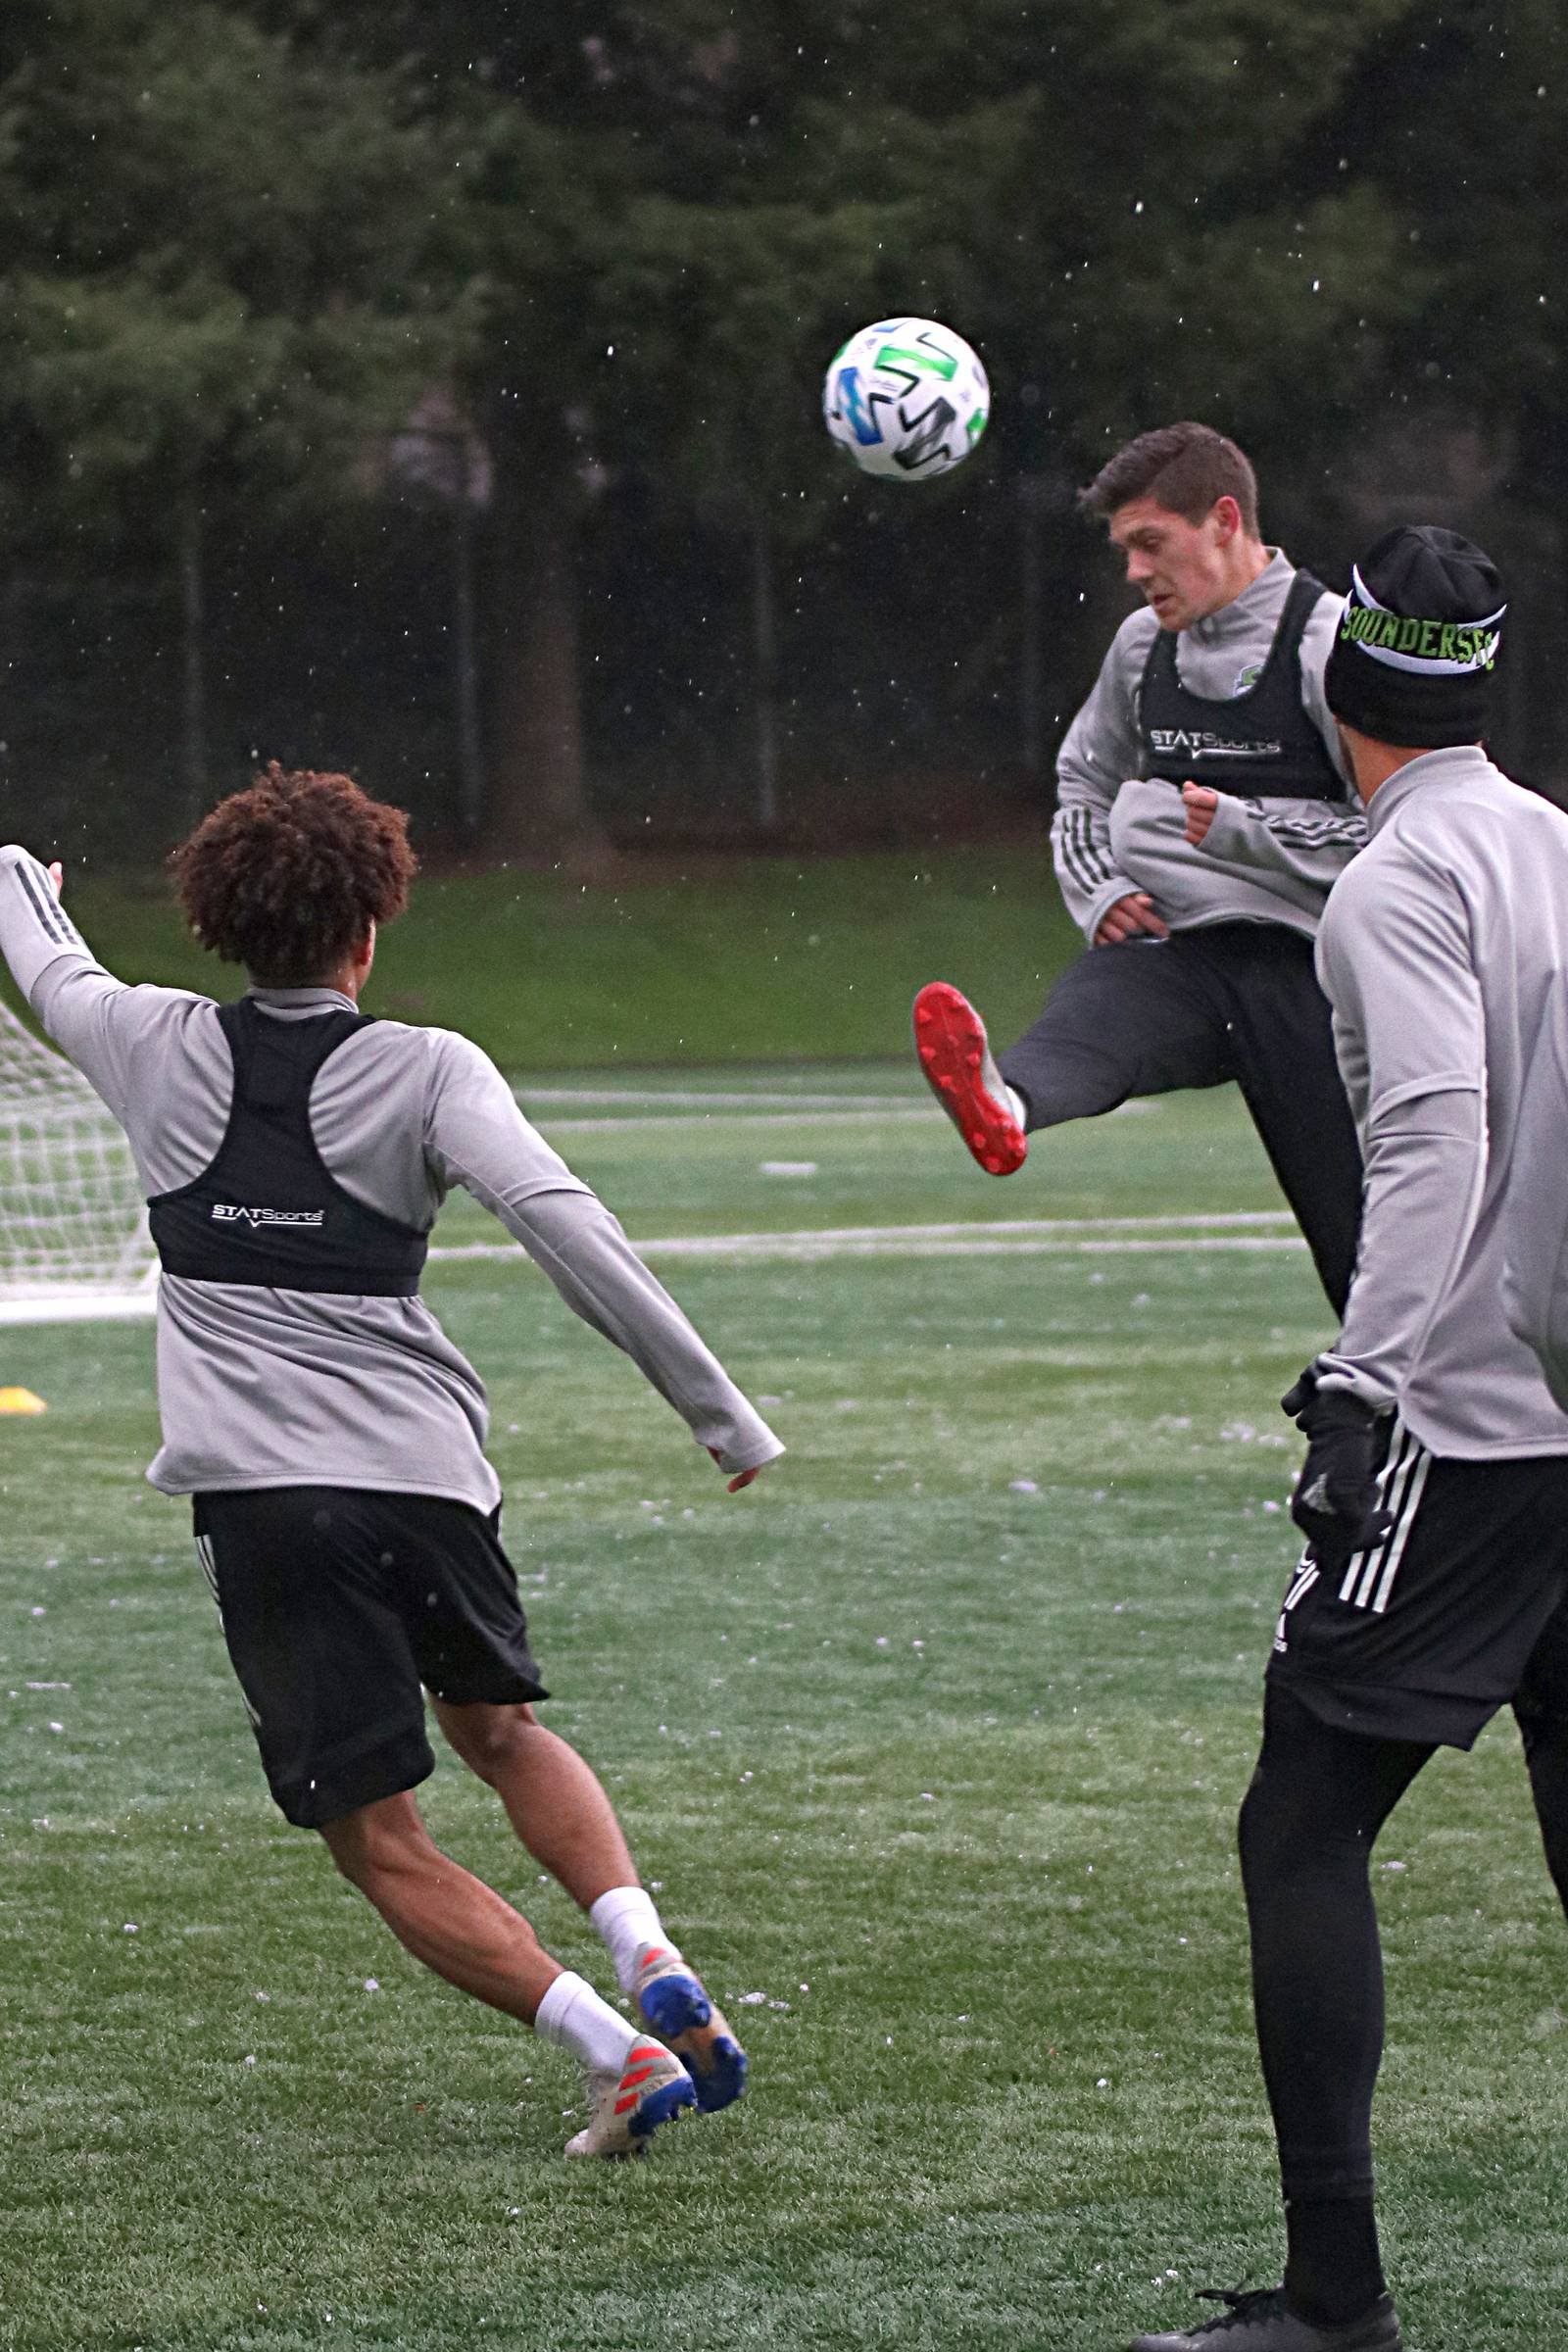  High flying headers on the first day of Sounders practice